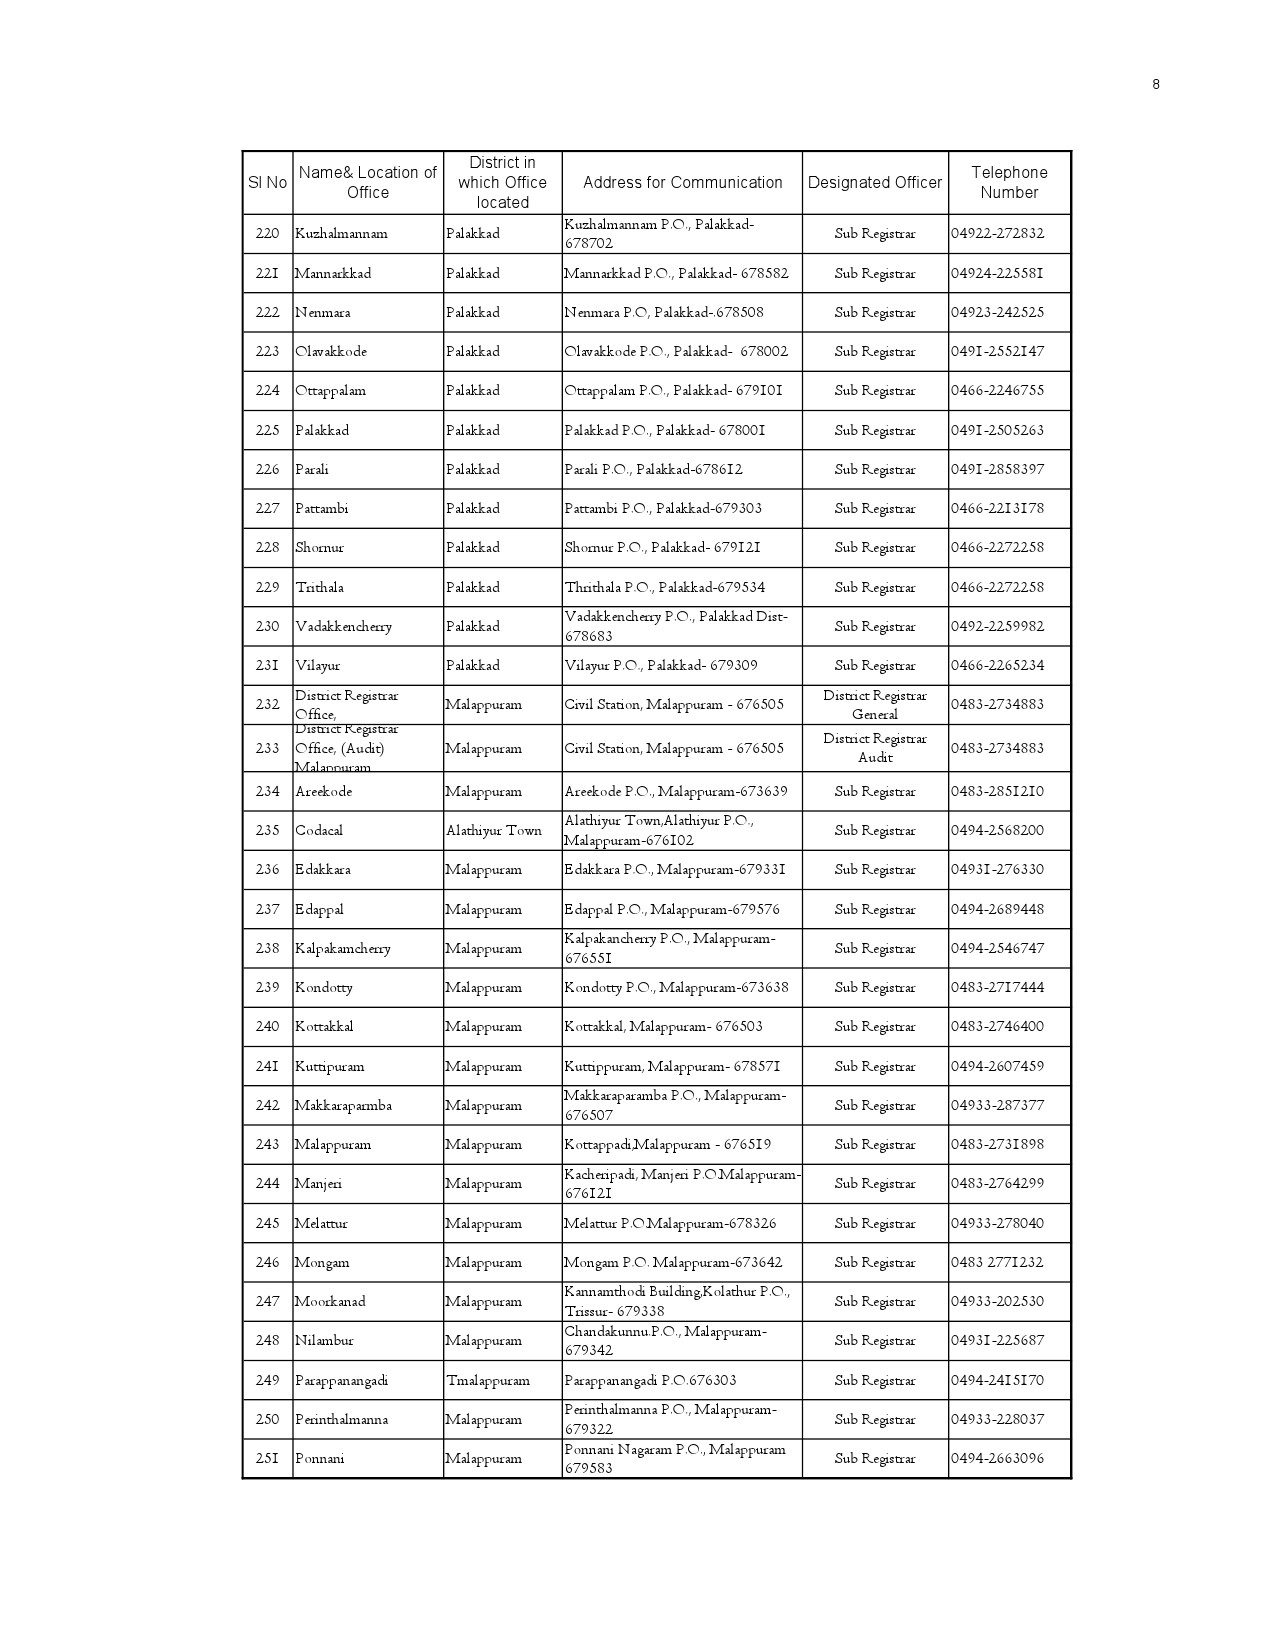 List of Offices in Kerala under the Department of Registration - Notification Image 8